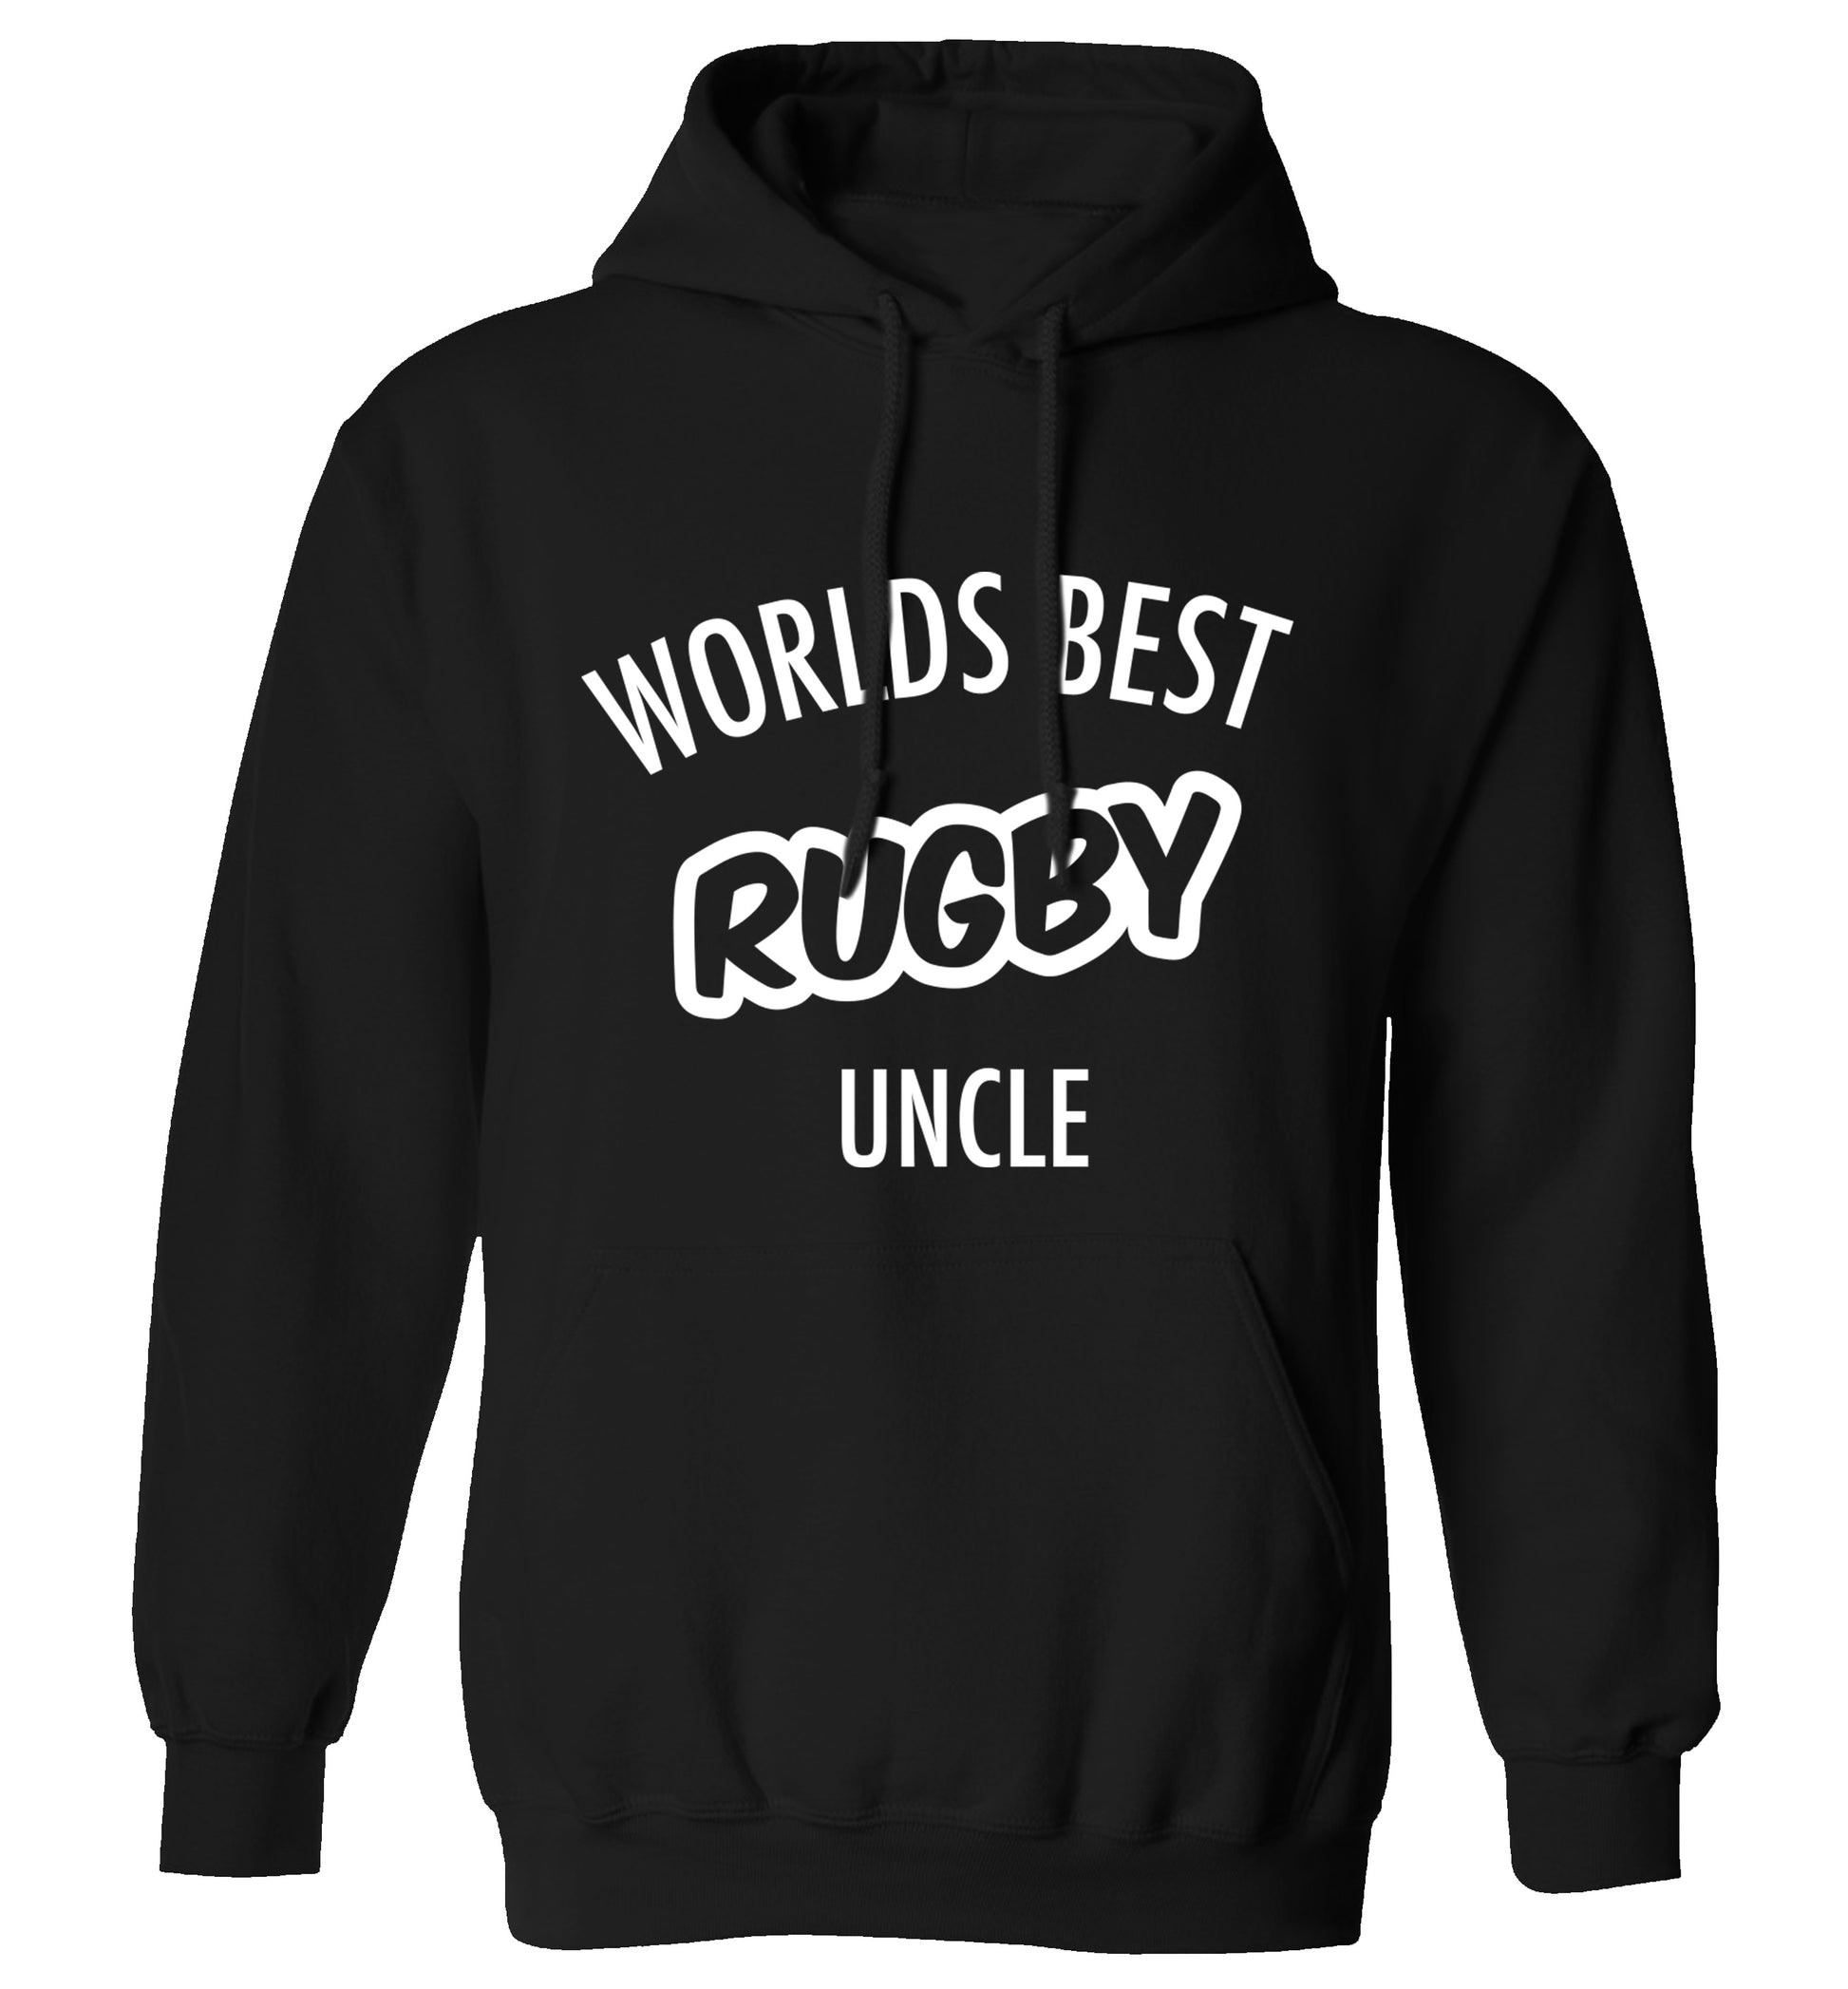 Worlds best rugby uncle adults unisex black hoodie 2XL